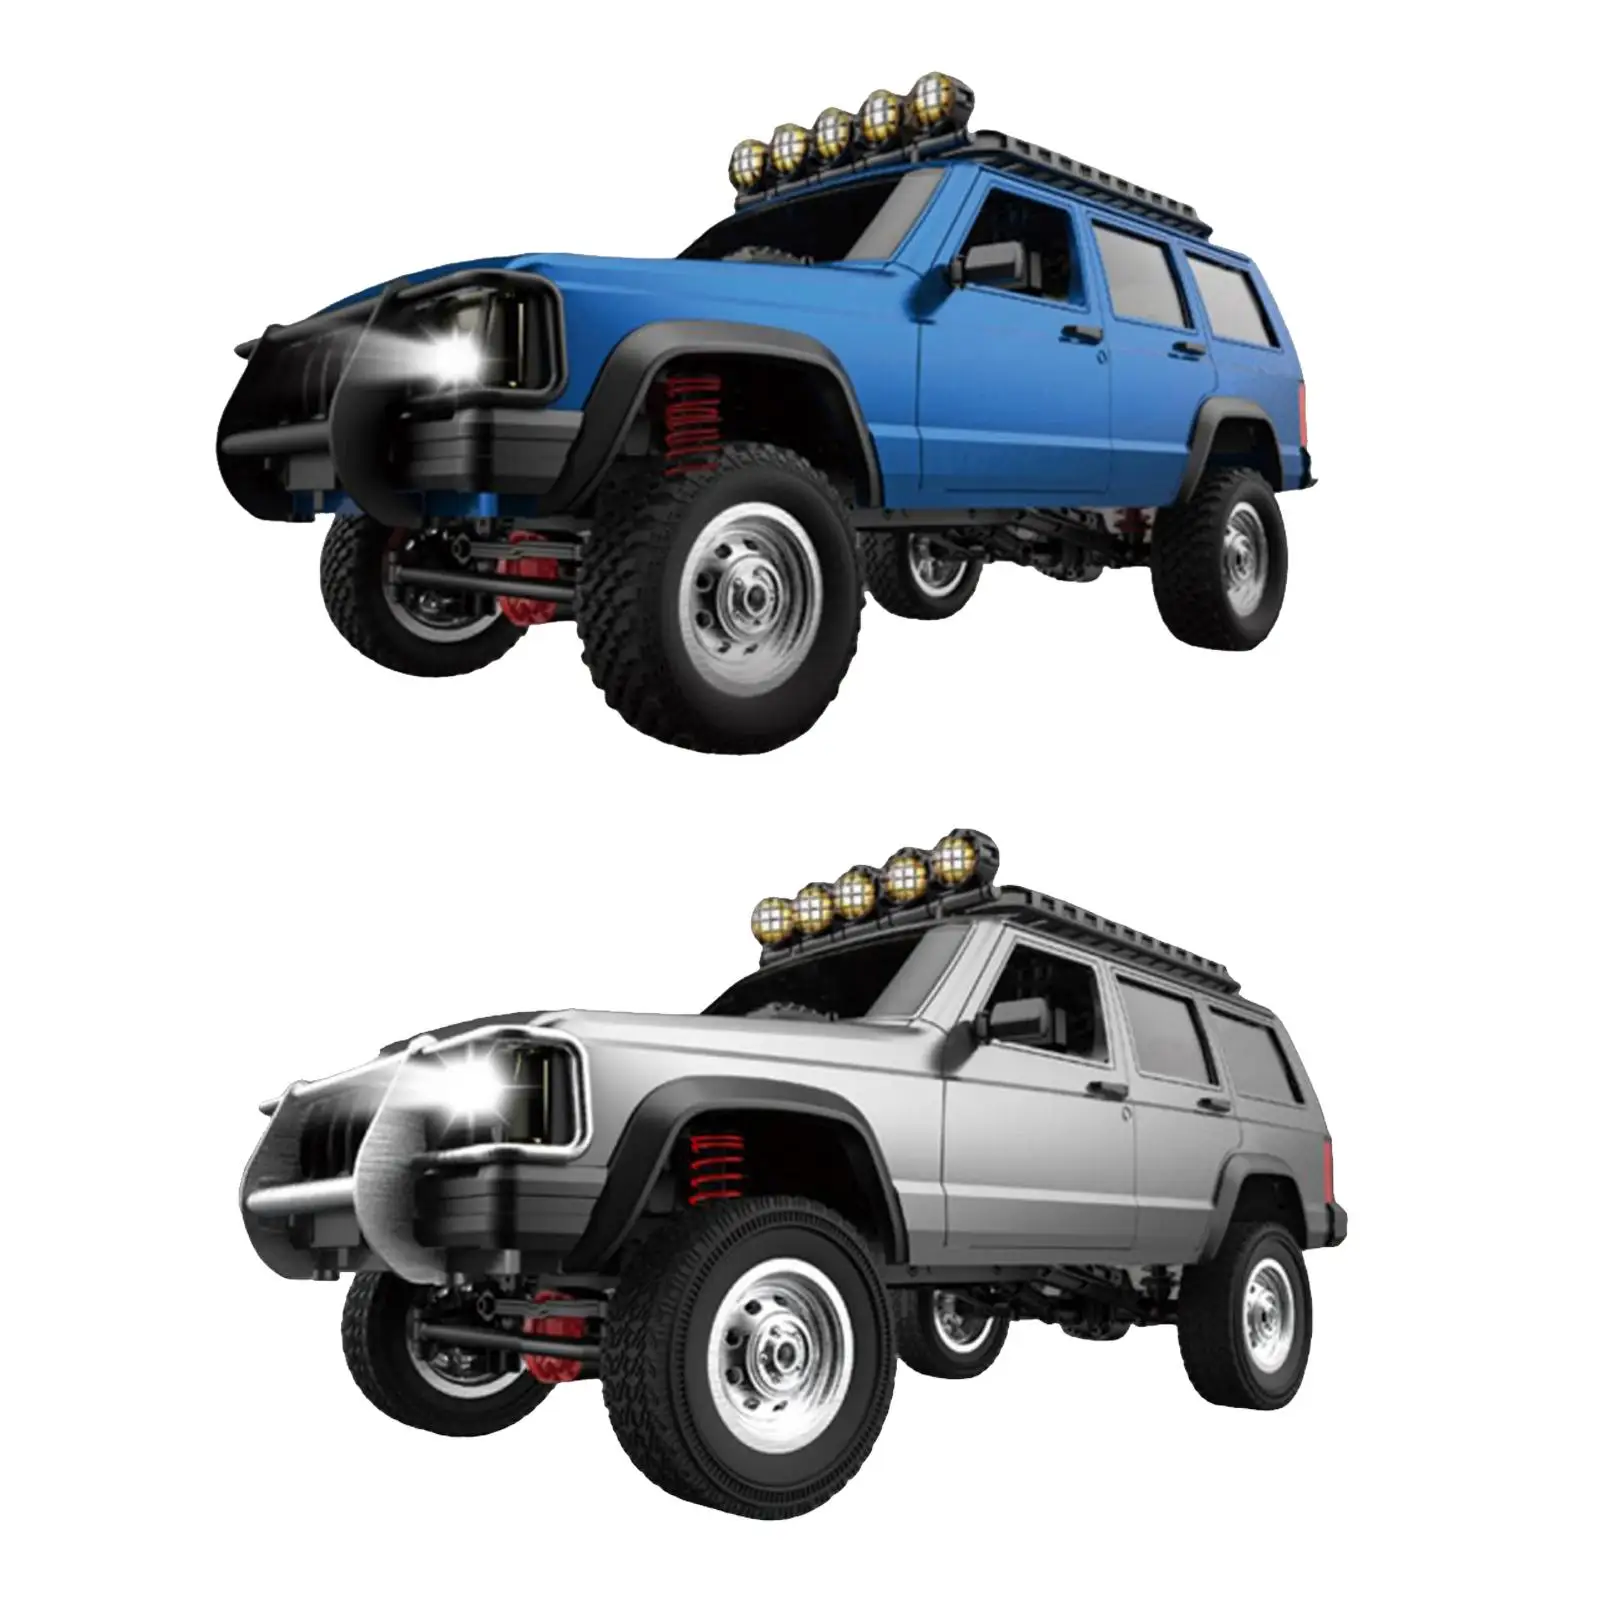 4WD 1:12 RC Car Rechargeable Battery LED Headlight Trucks Remote Control Rock Crawler 2.4G for Children Adult Boys Kids